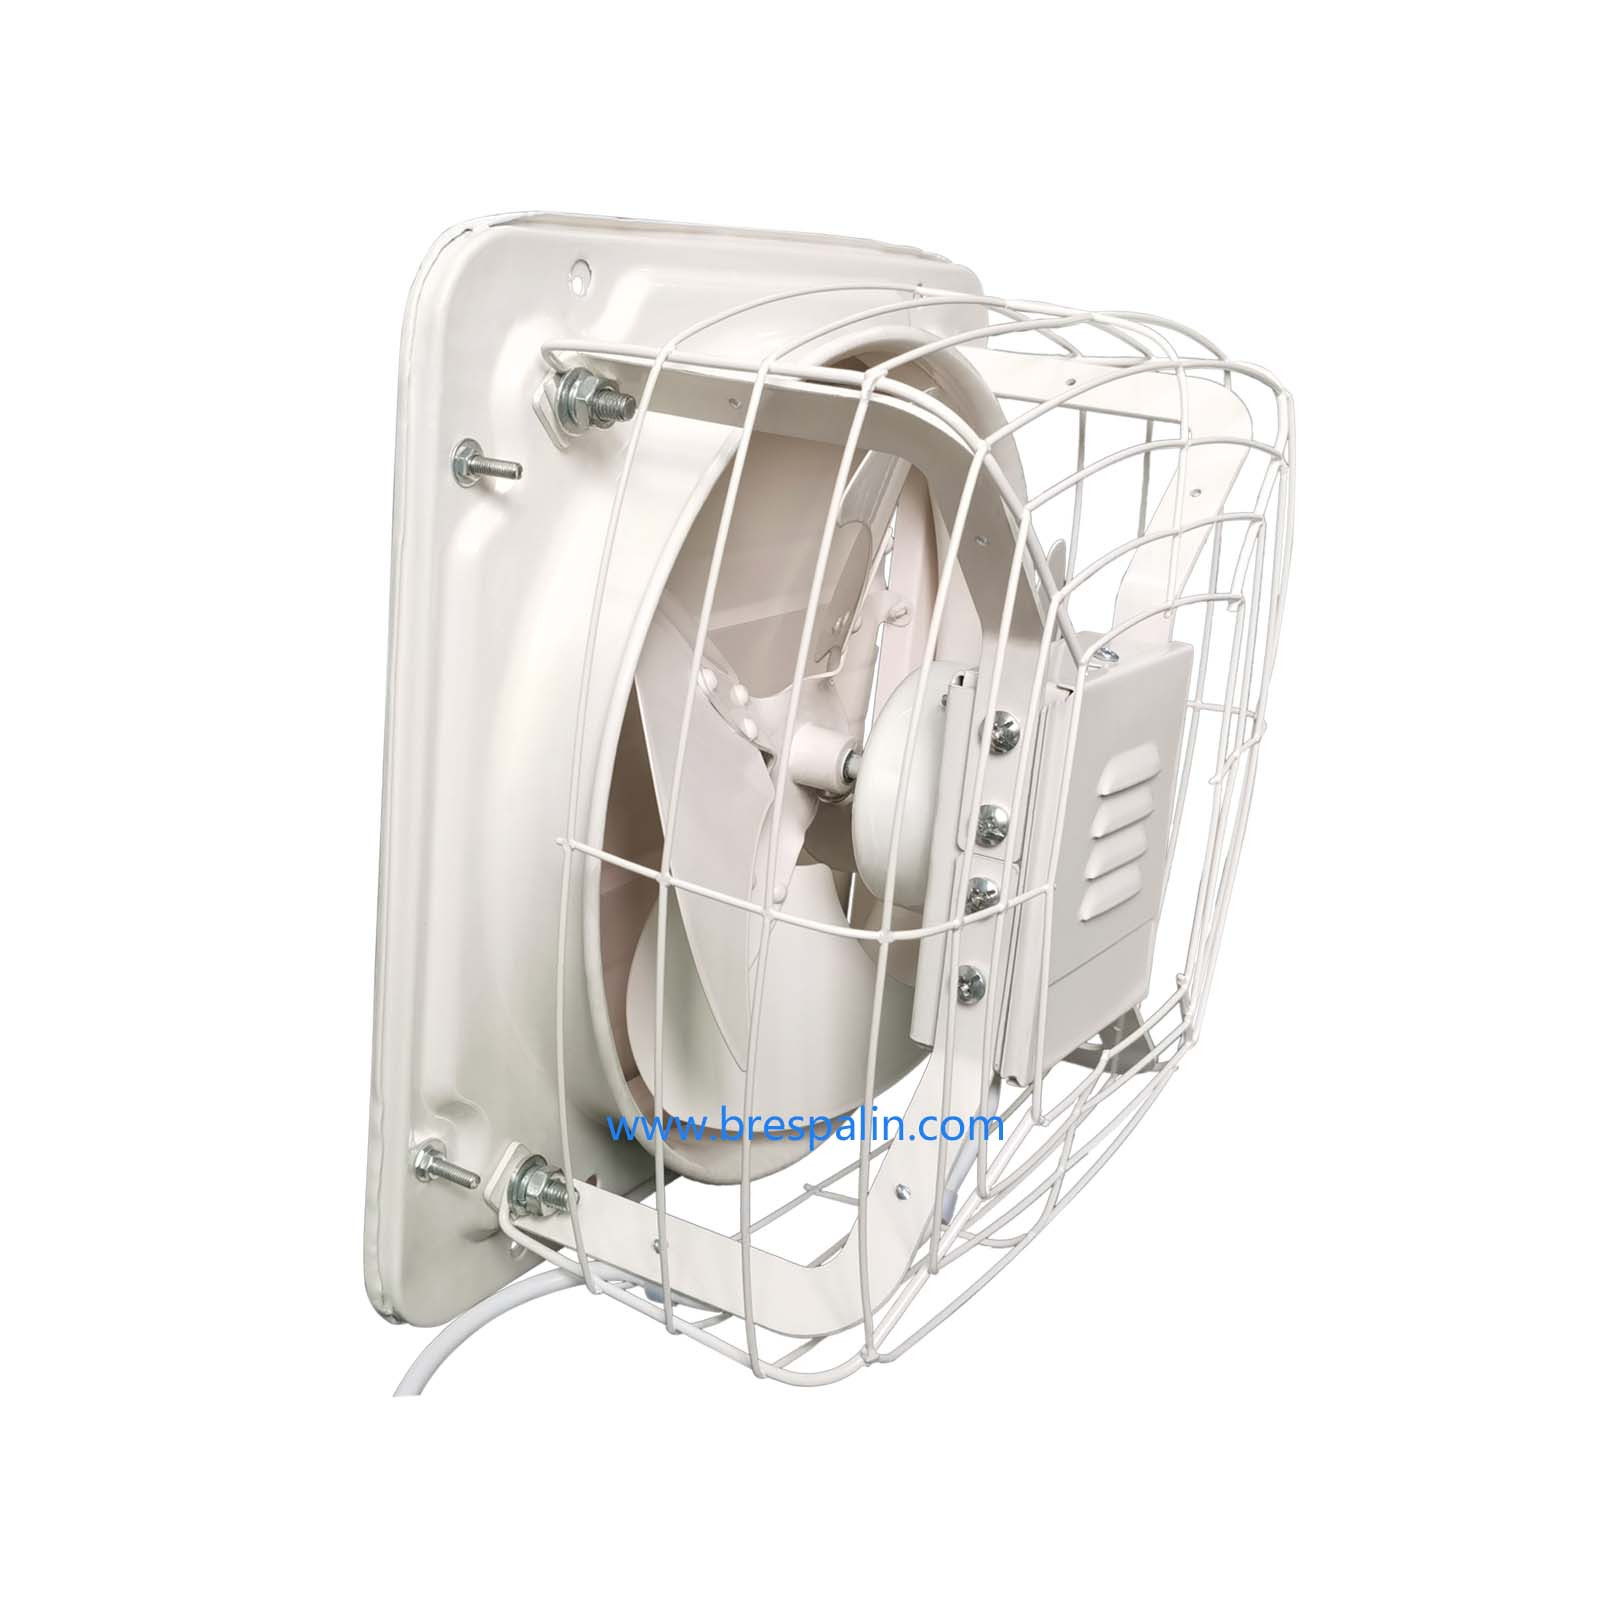 8 Inch Axial Flow Industrial Wall Exhaust Fan for Warehouse and Factory Using